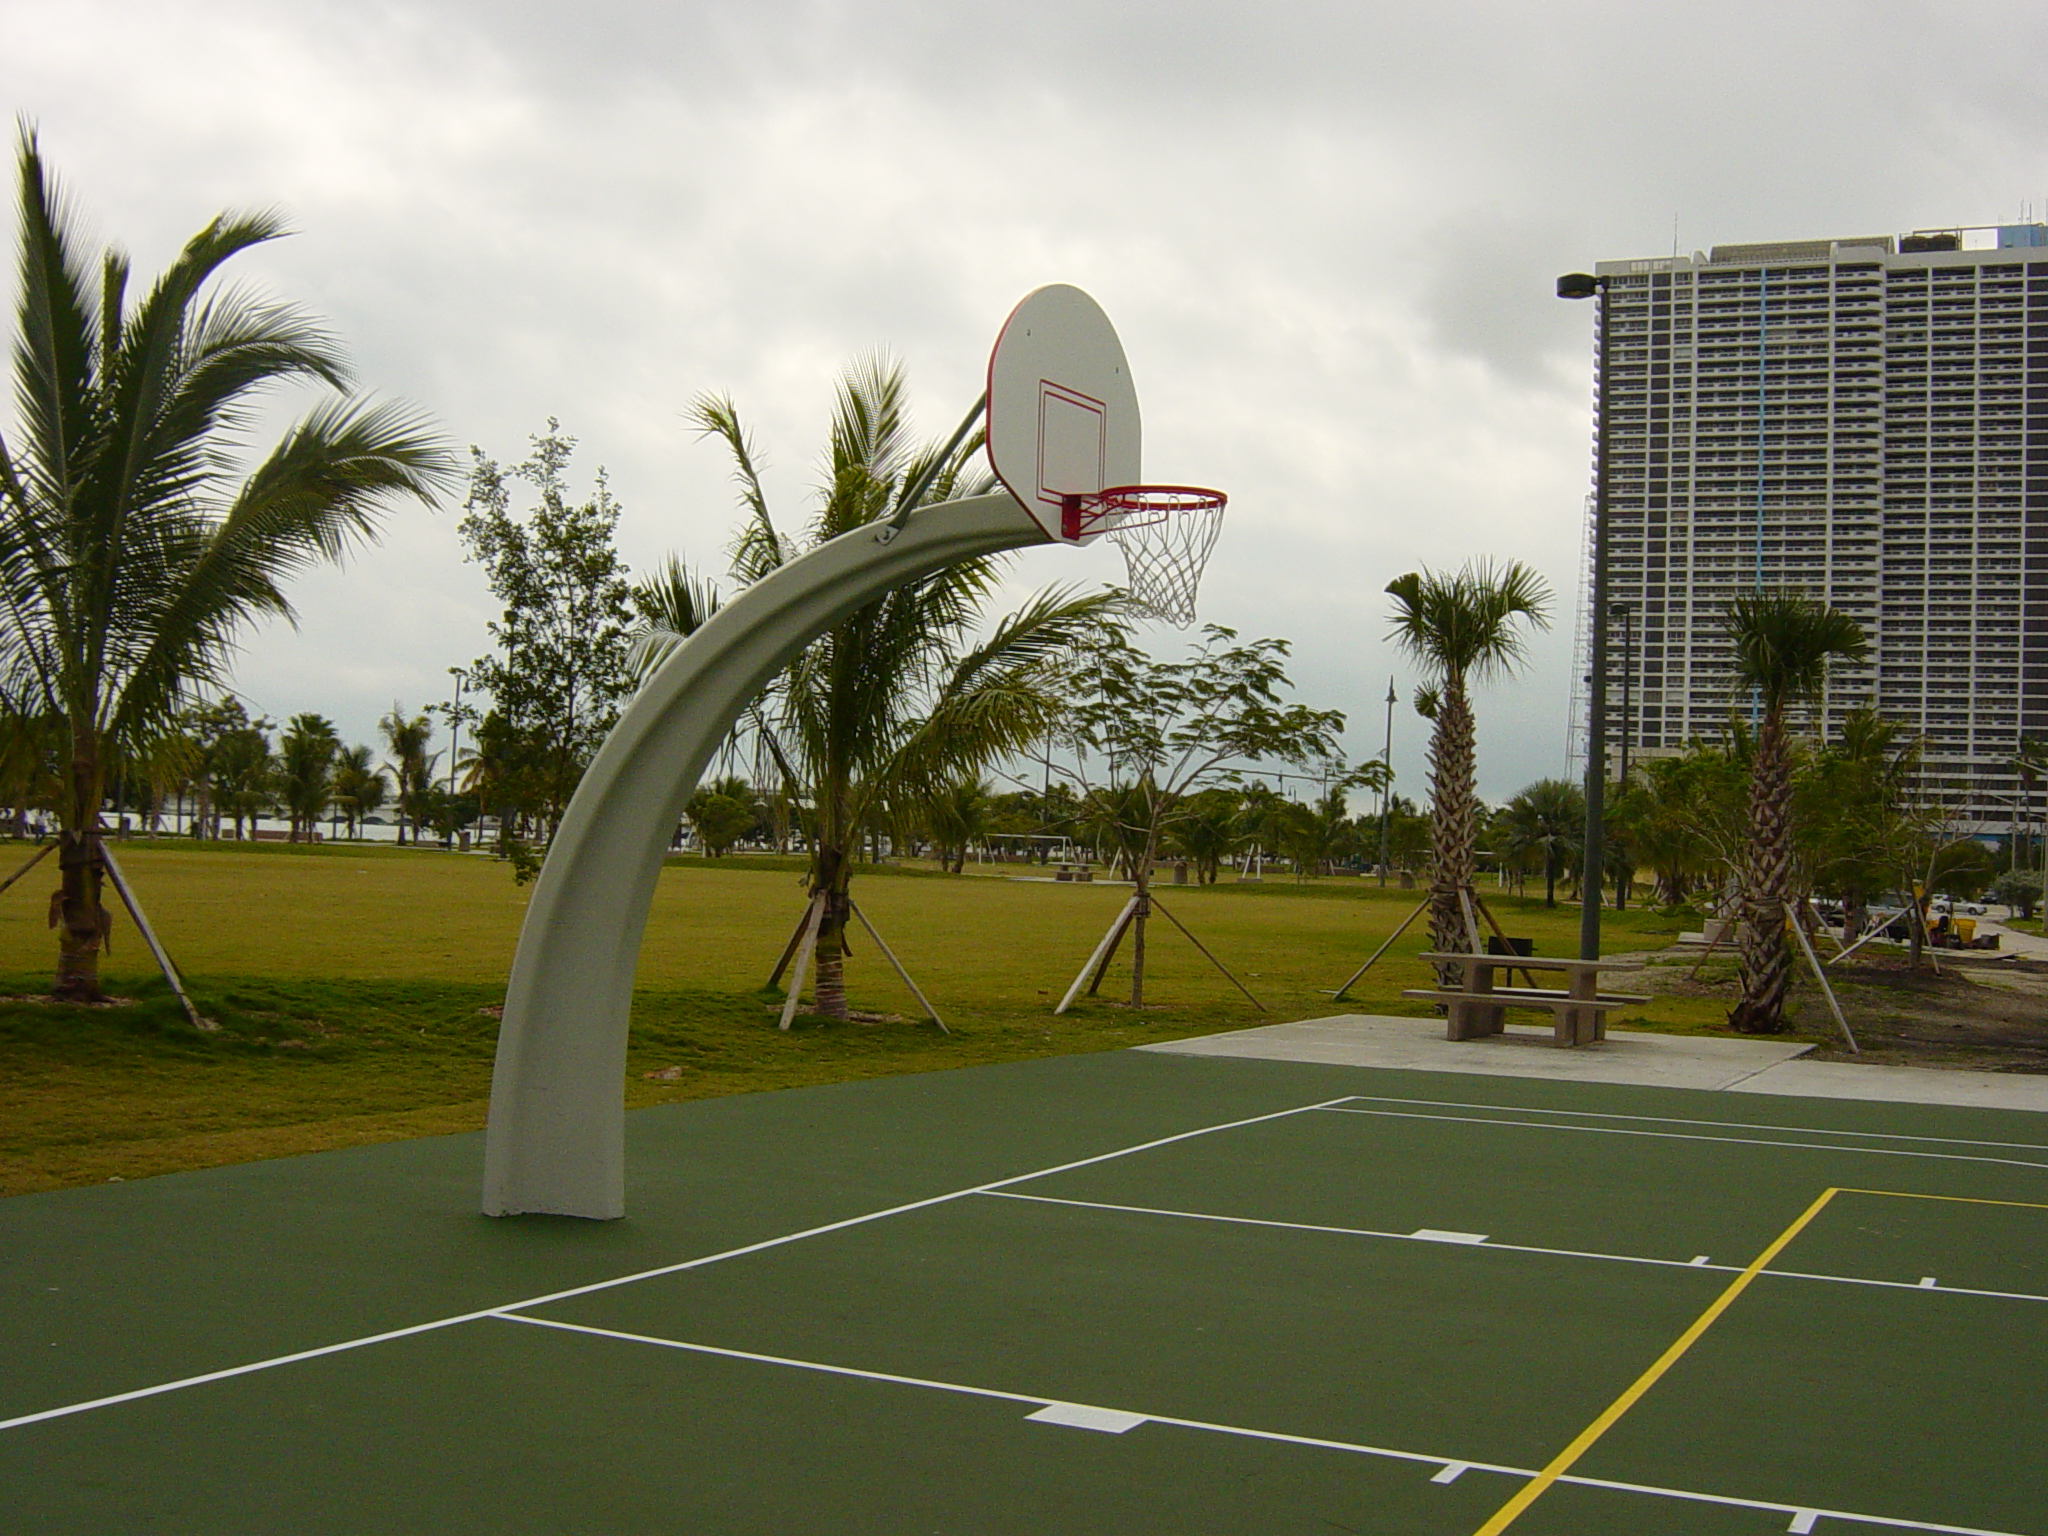 Margaret Pace Park basketball court in Miami, FL